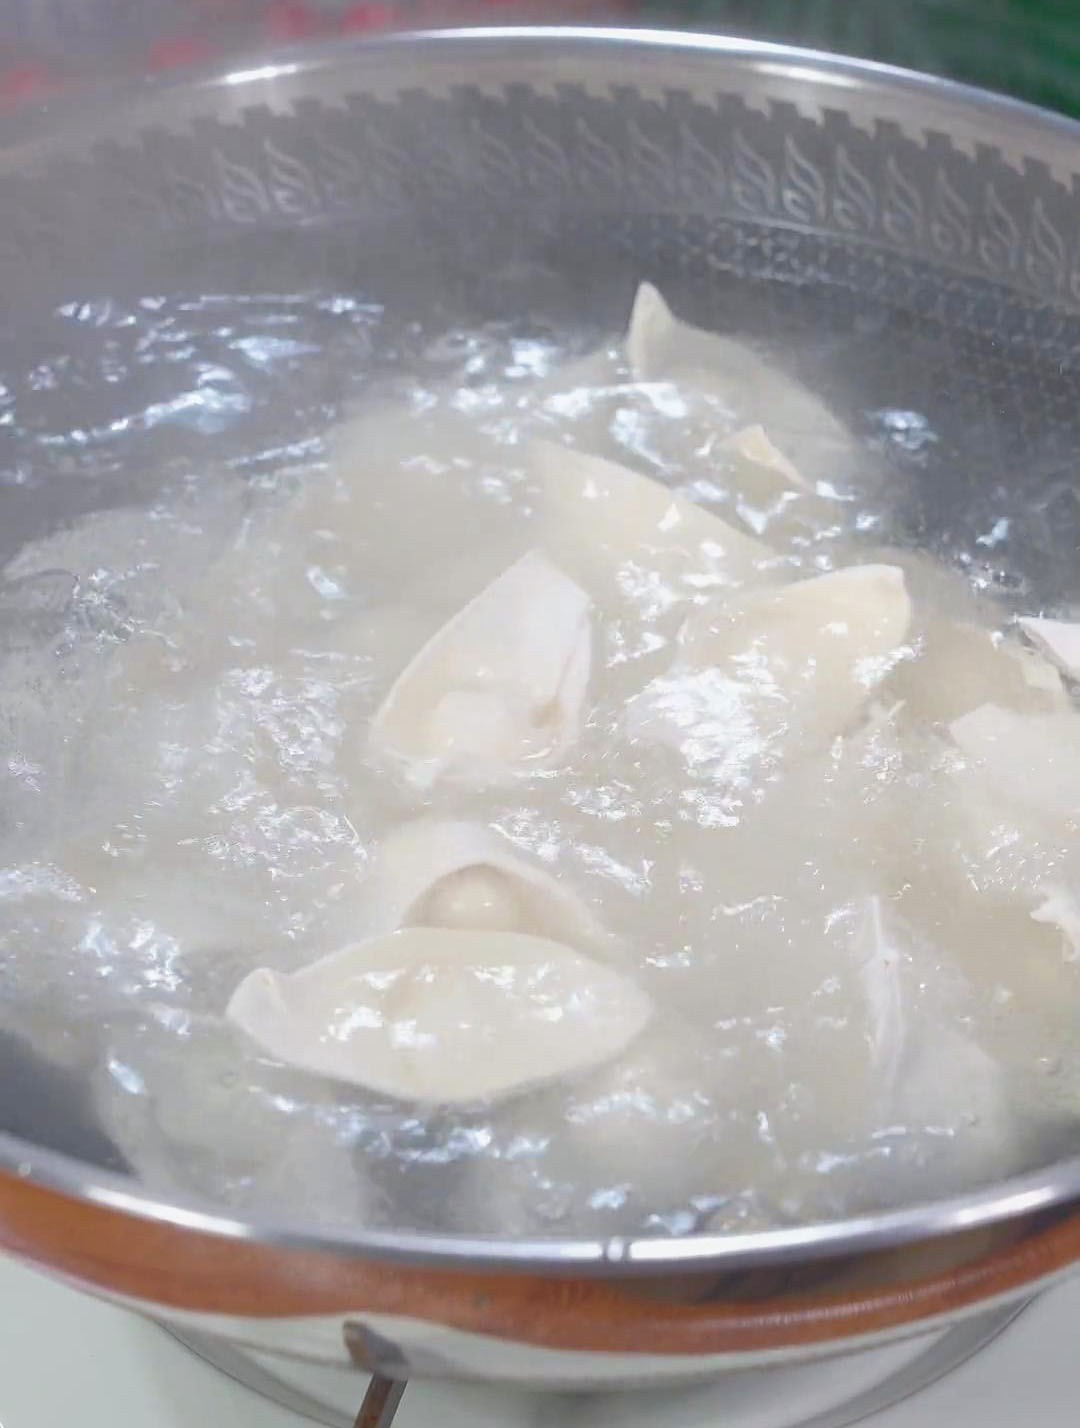 Bring water to a boil and cook the wontons until they float